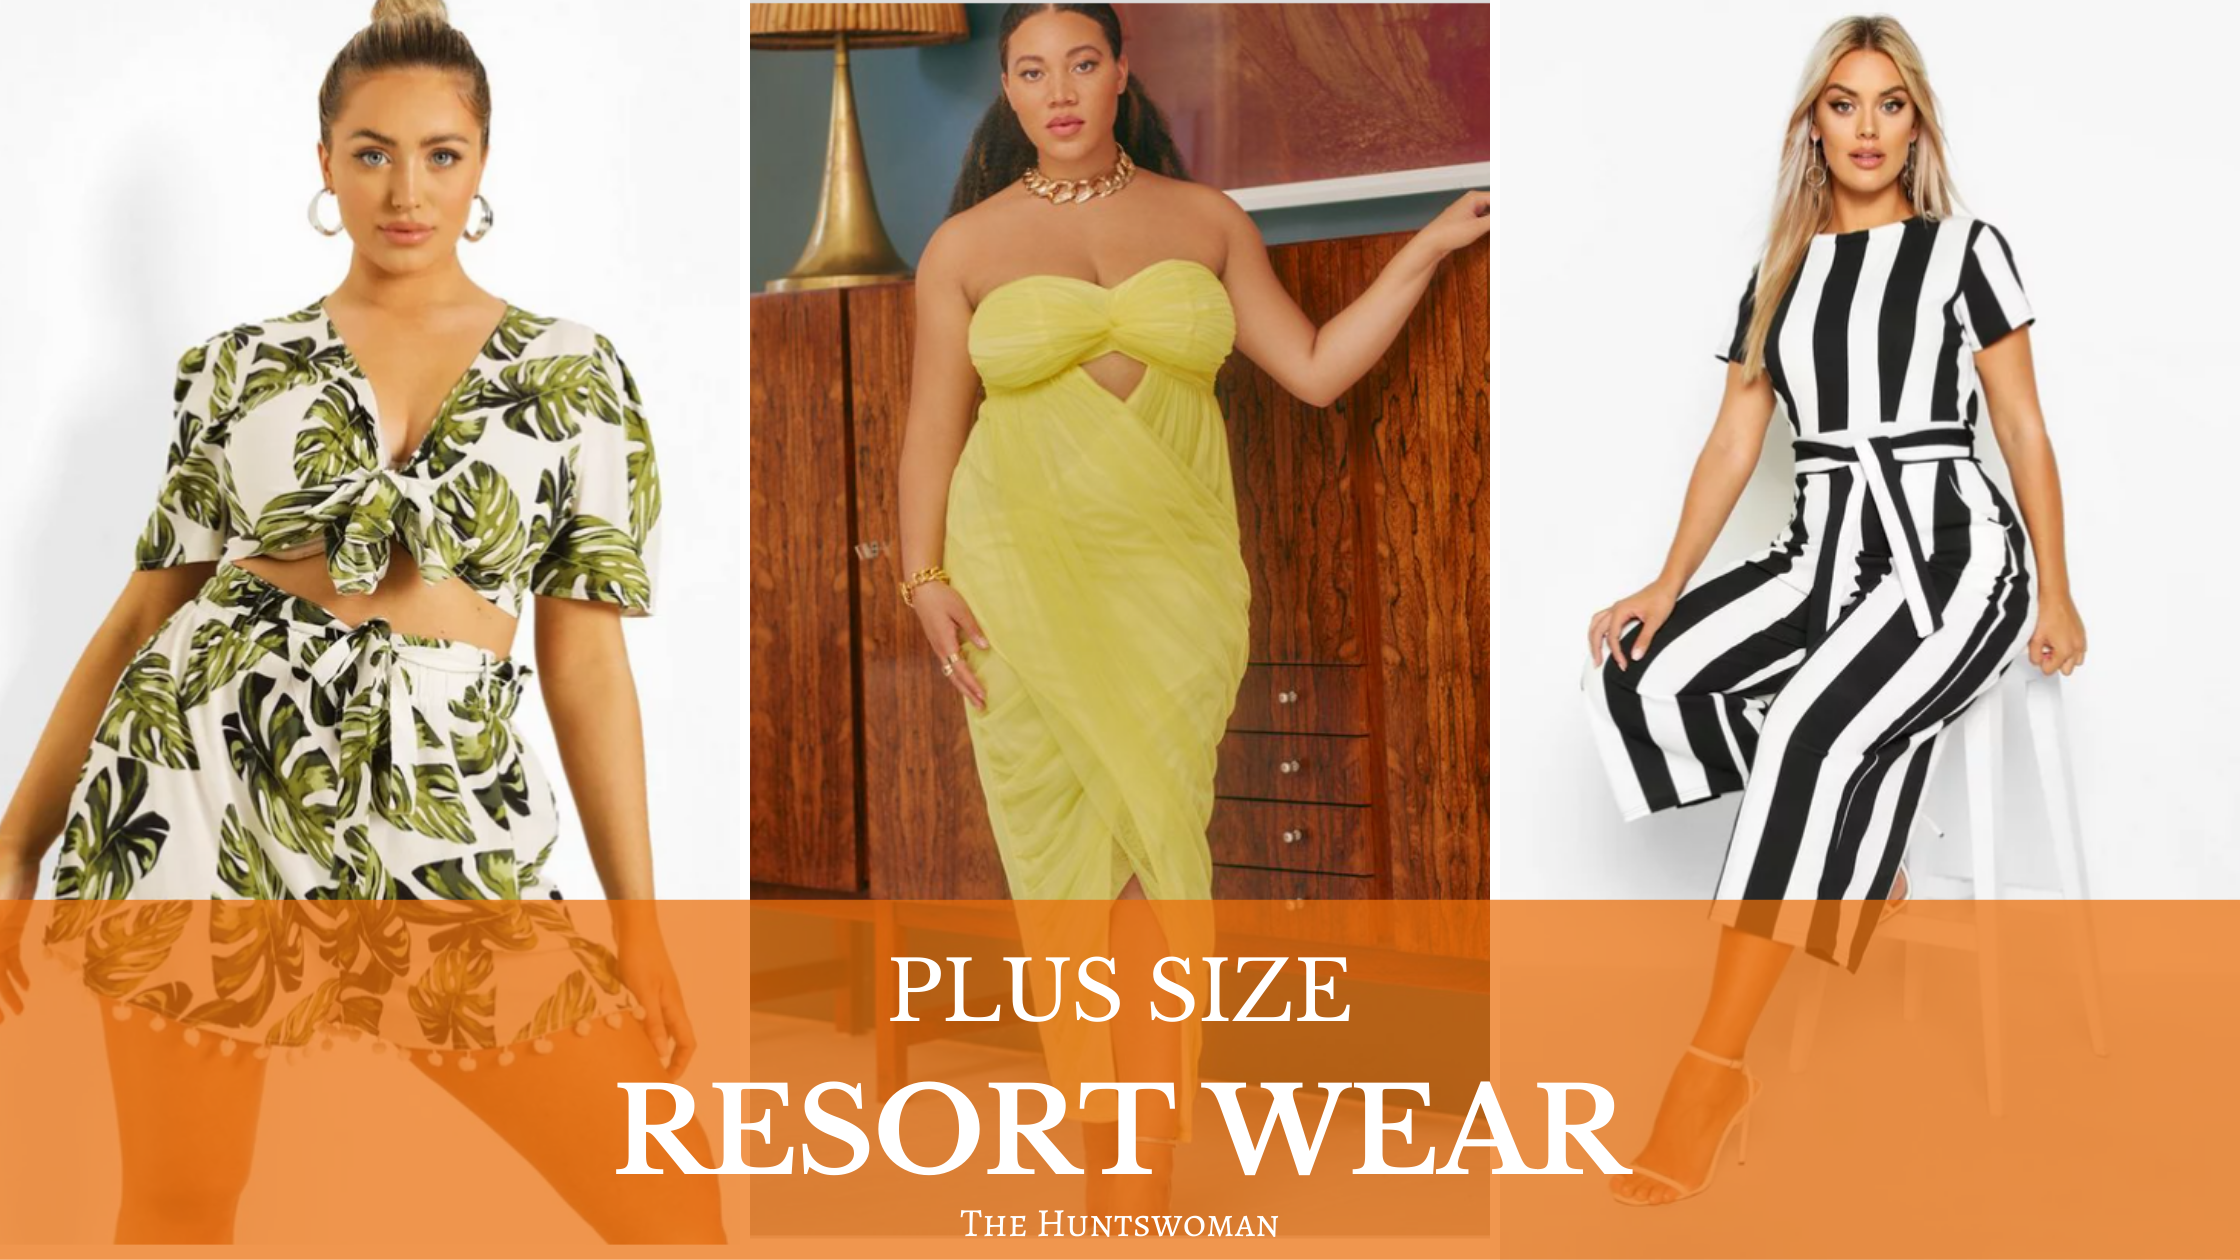 Where to for Plus Size Resort Wear The